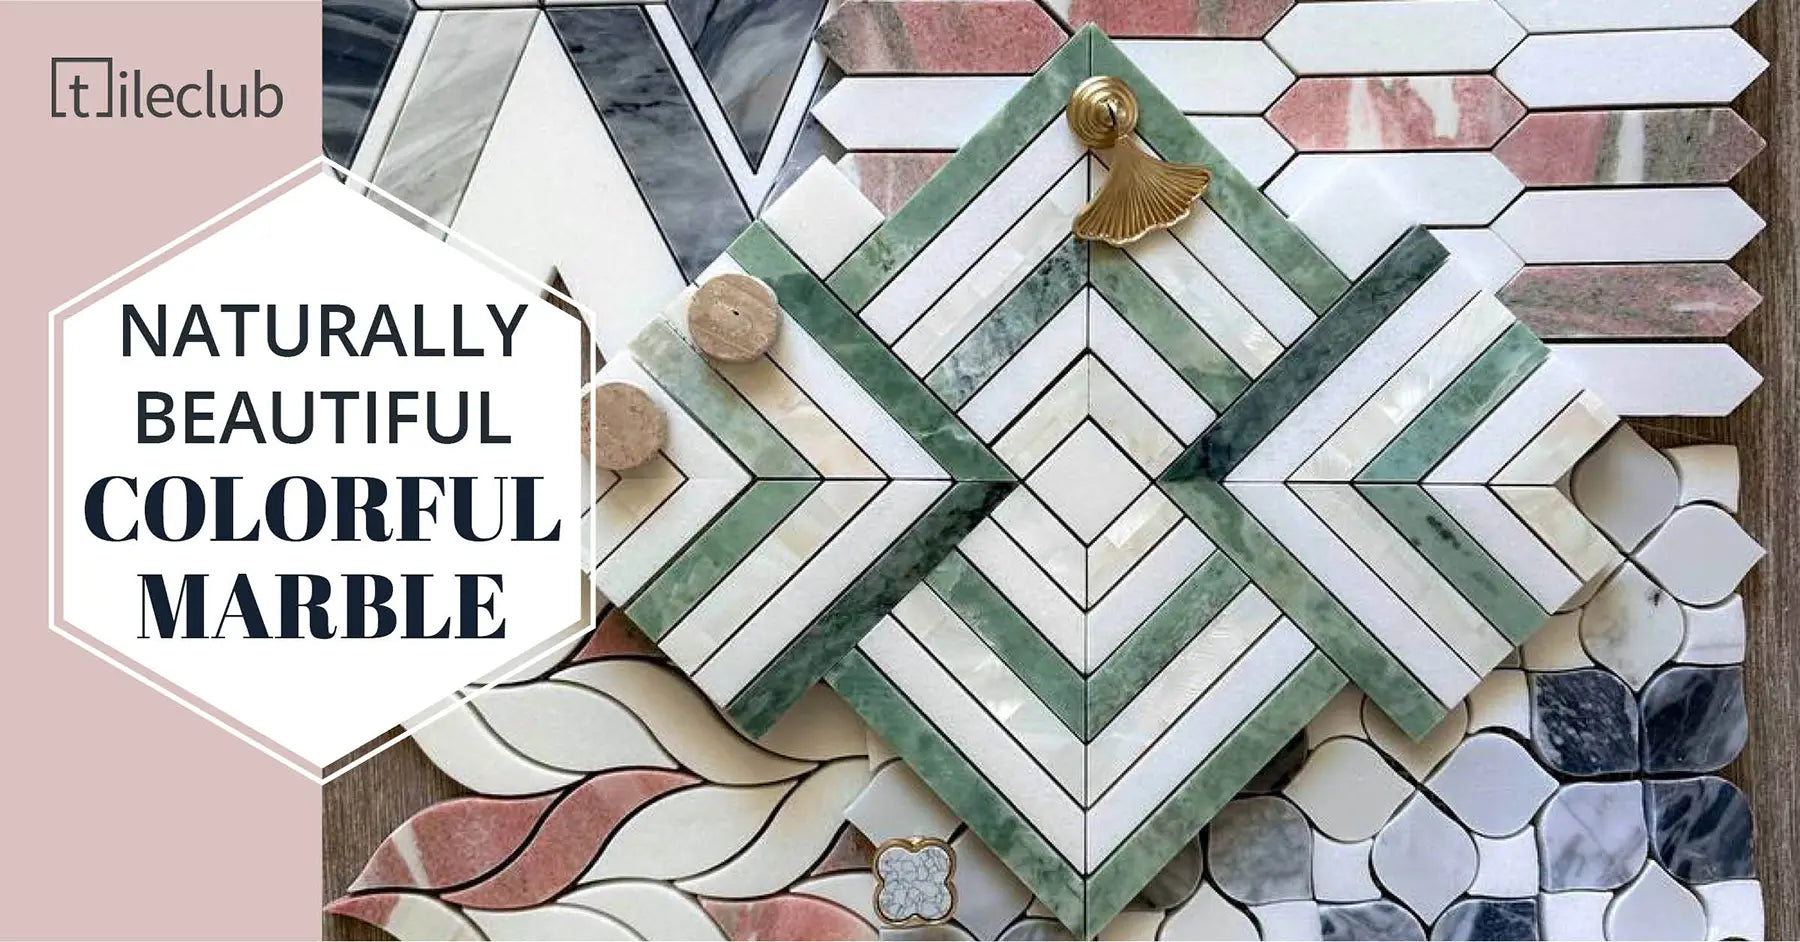 Colorful Marble Tiles for Creative Interiors